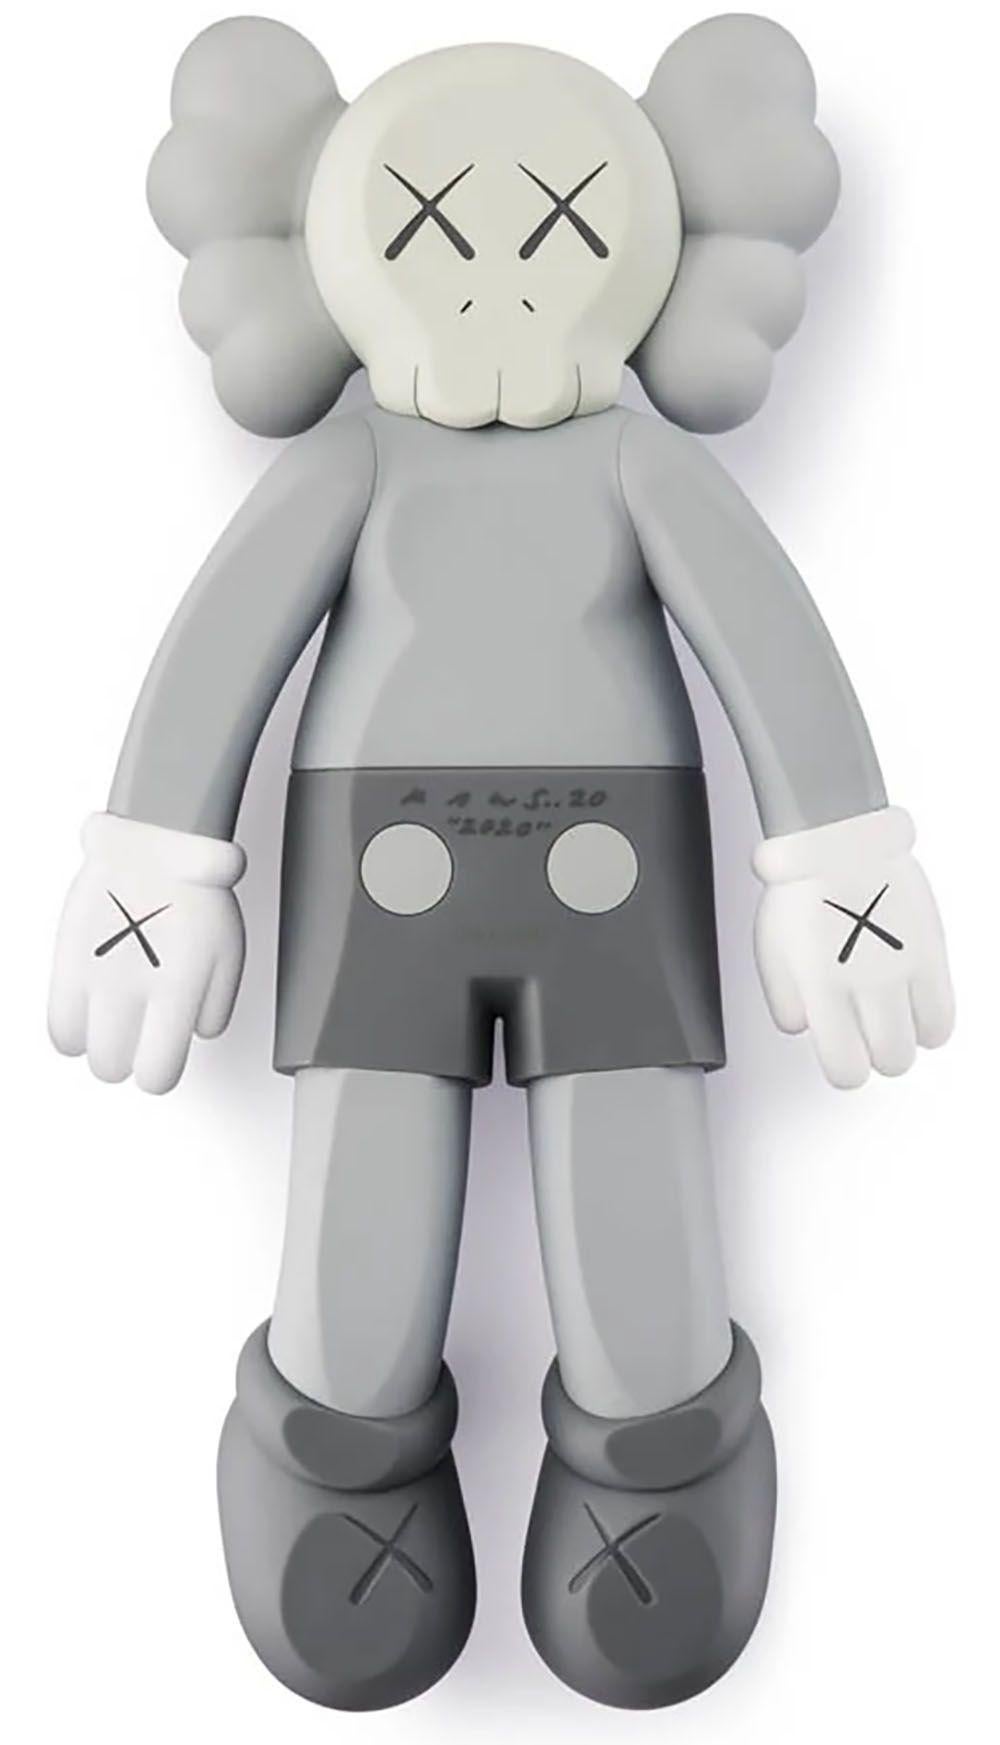 KAWS 2020 Companion: Complete Set of 3 Works: 
KAWS COMPANION 2020 was created by KAWS to commemorate the 20th anniversary of his signature figure, Companion — and as cultural commentary on a year we will all never forget. KAWS' COMPANION 2020 was